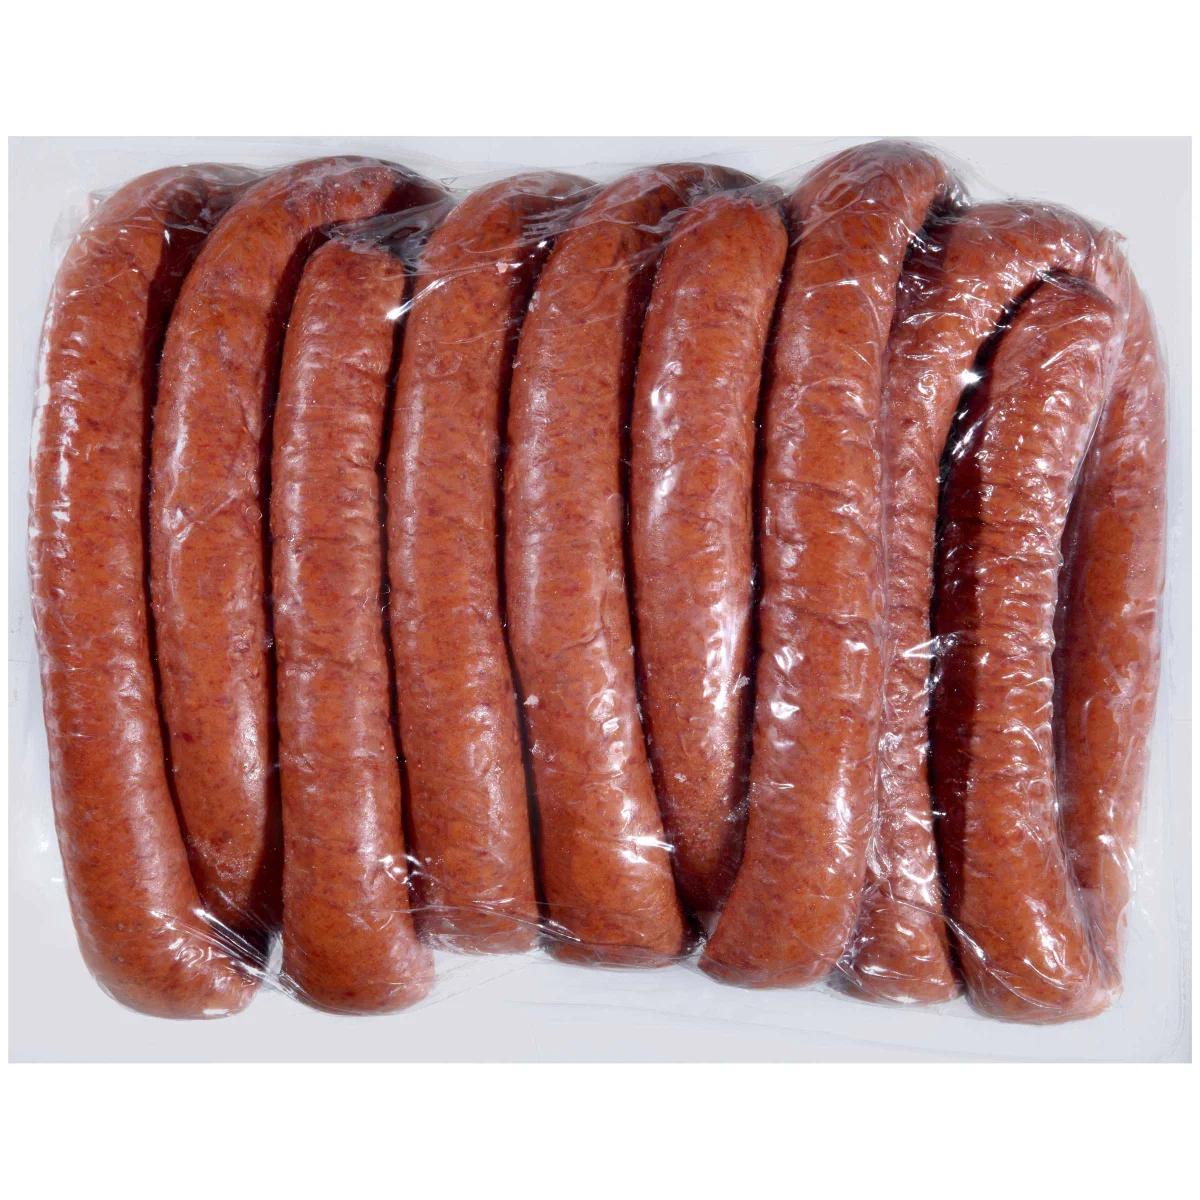 bulk smoked sausage - How much sausage do I need for 100 people